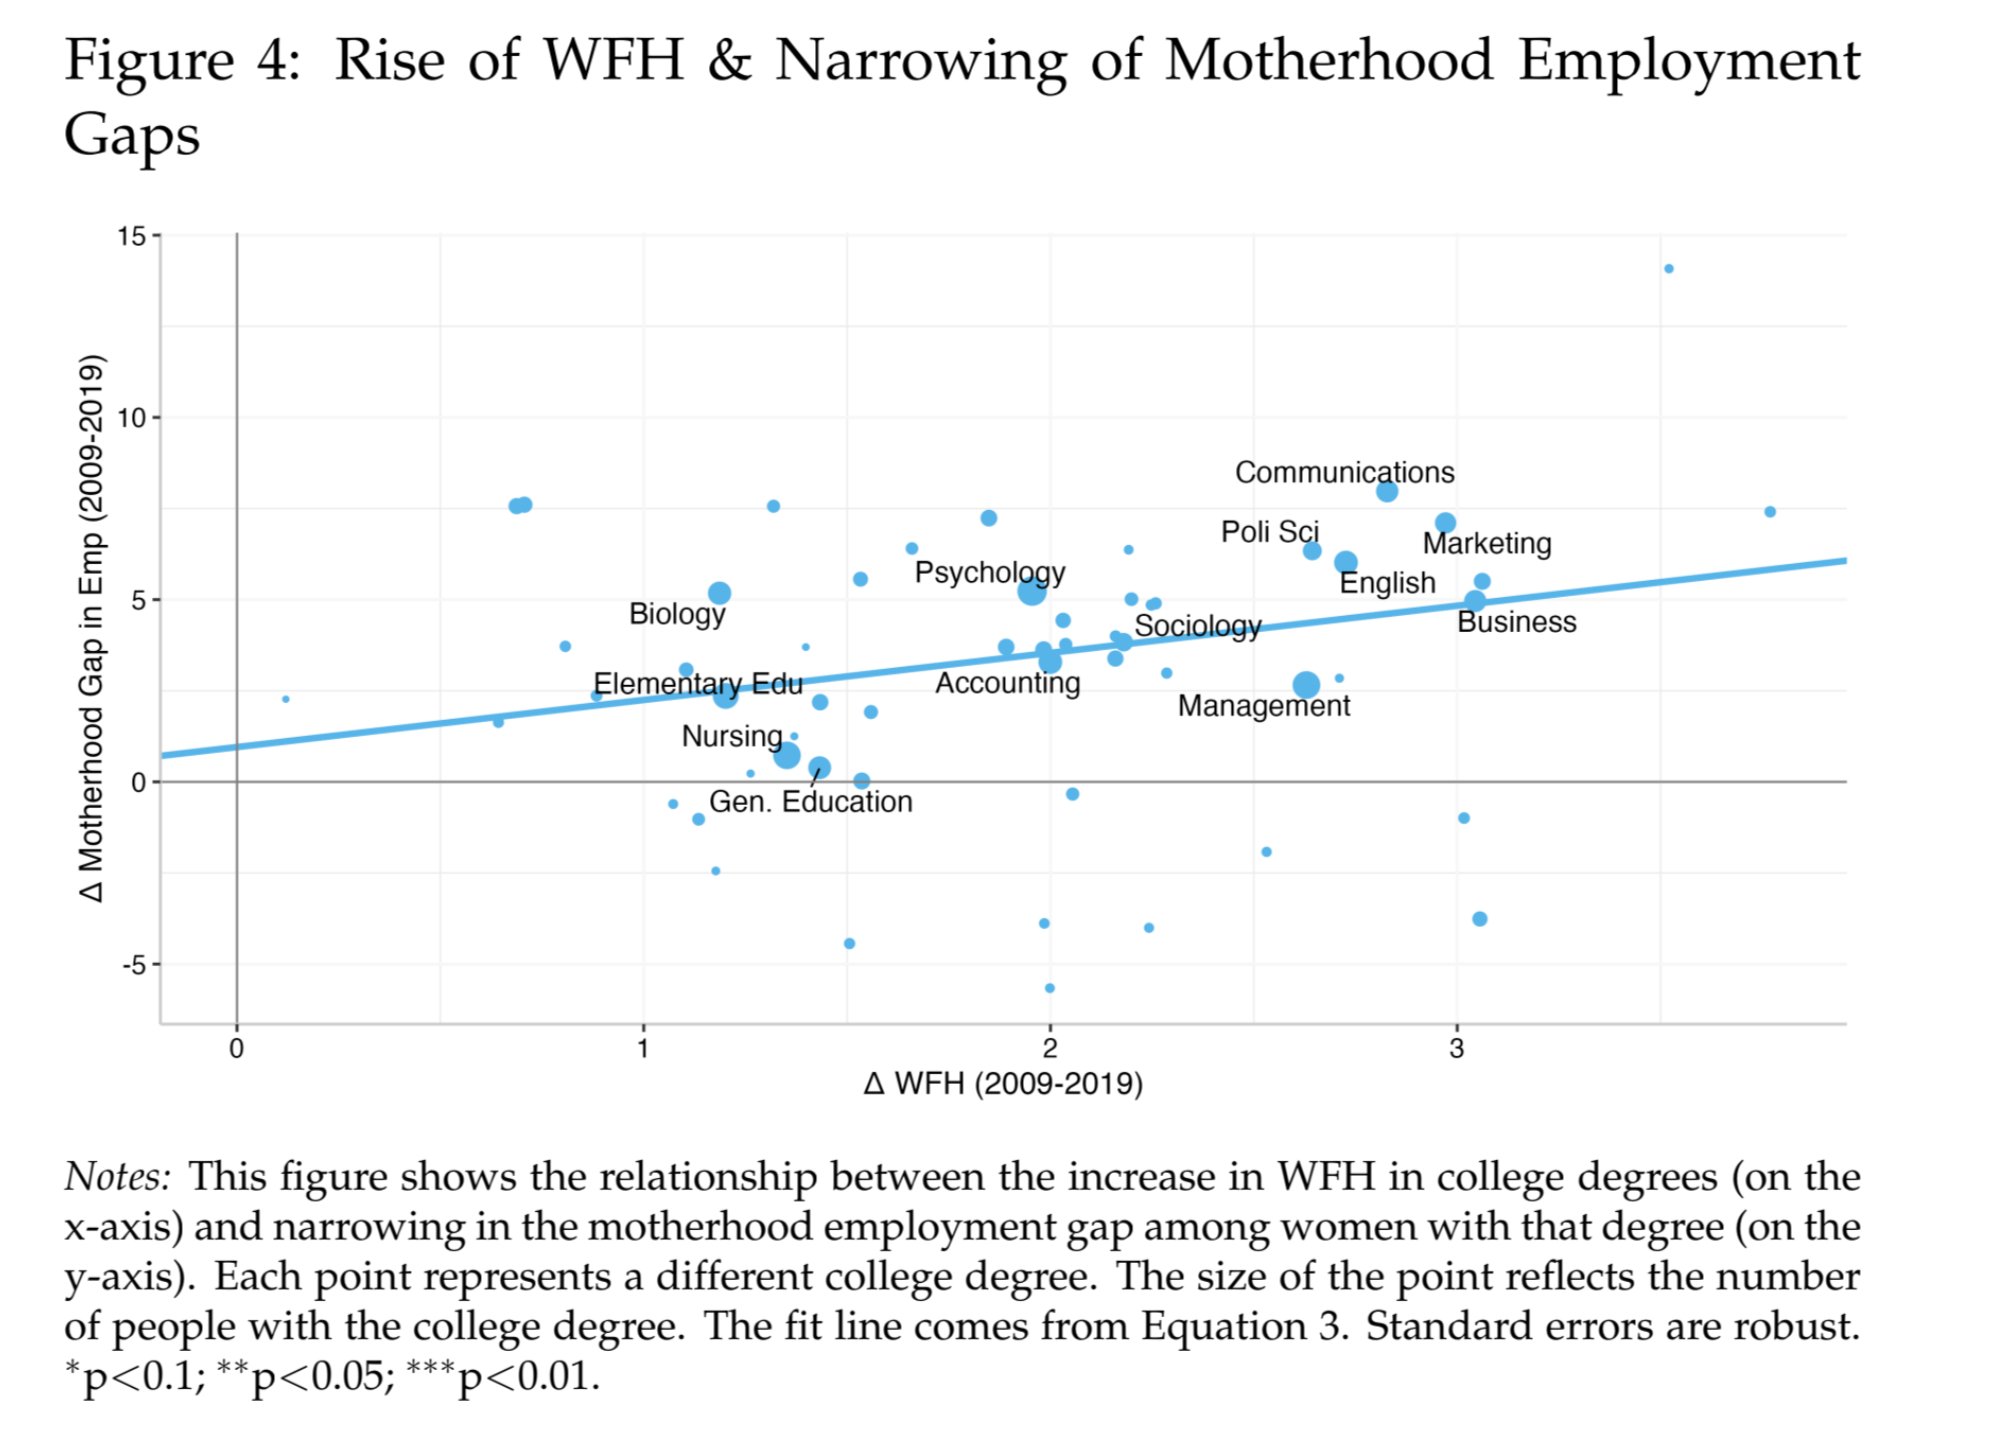 WFH is benificial to the participation rate of parents and caregivers